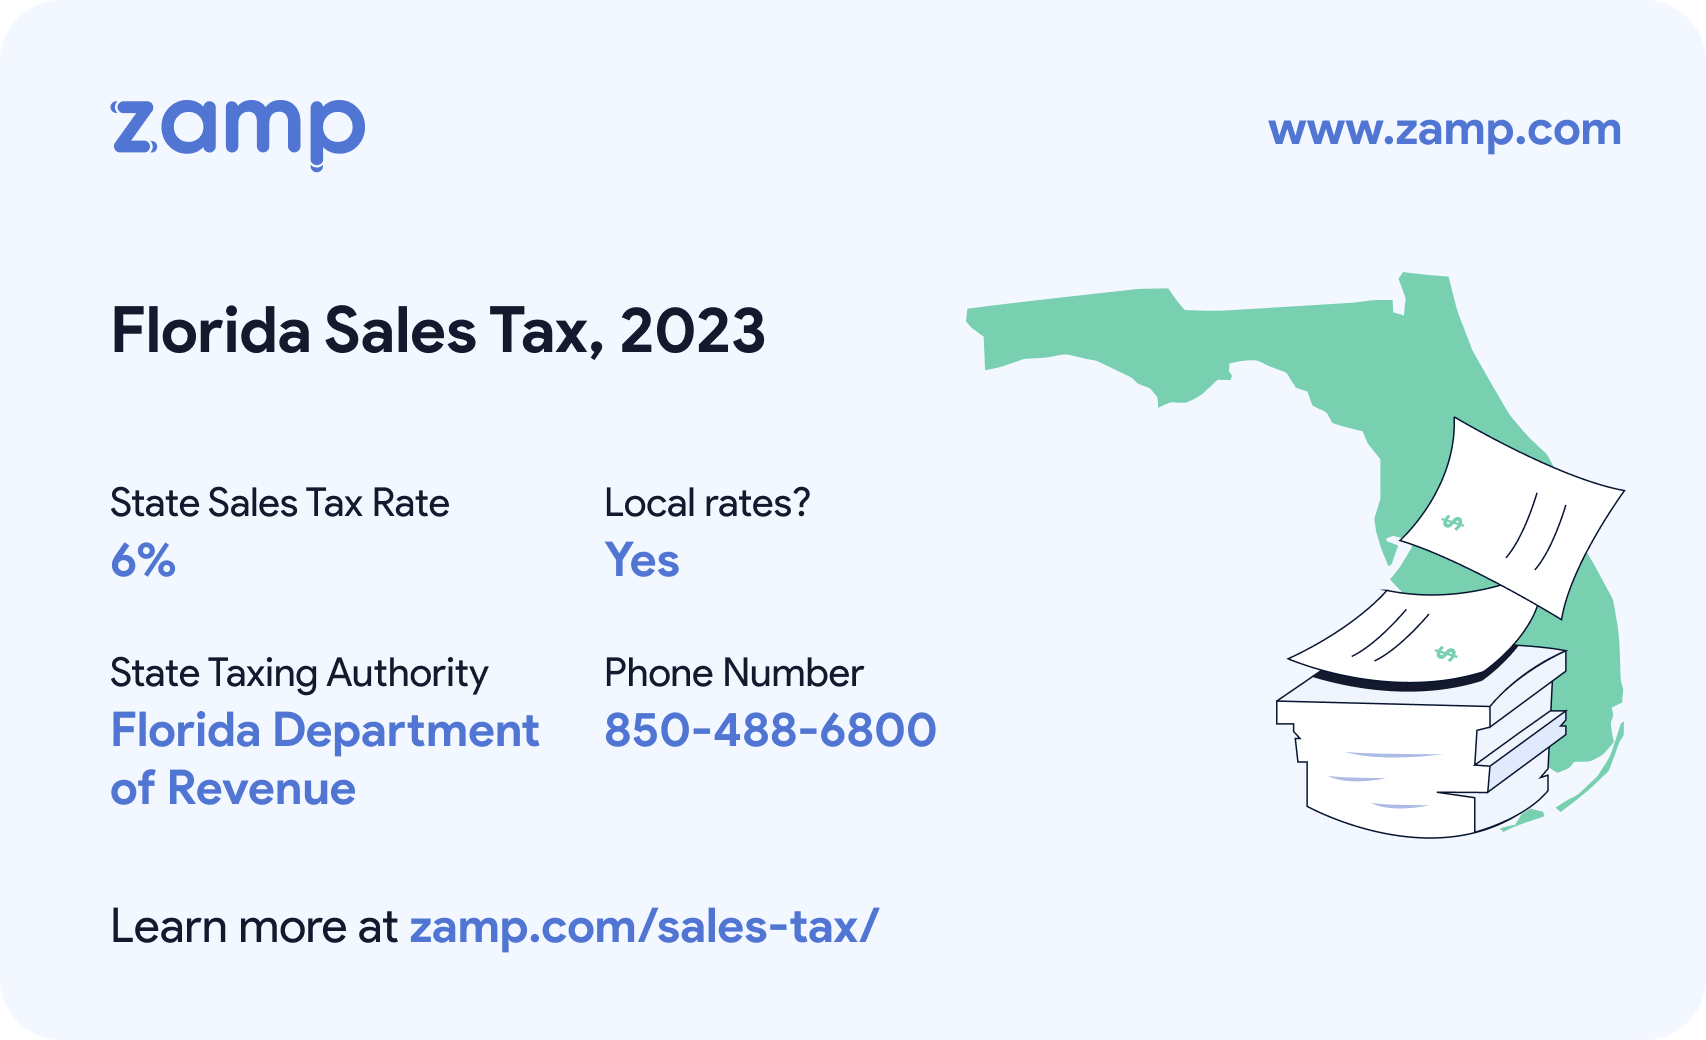 Florida basic sales tax info for 2023 - State sales tax rate: 6%, Local rates? Yes; State Taxing Authority: Florida Department of Revenue; and phone number 850-488-6800